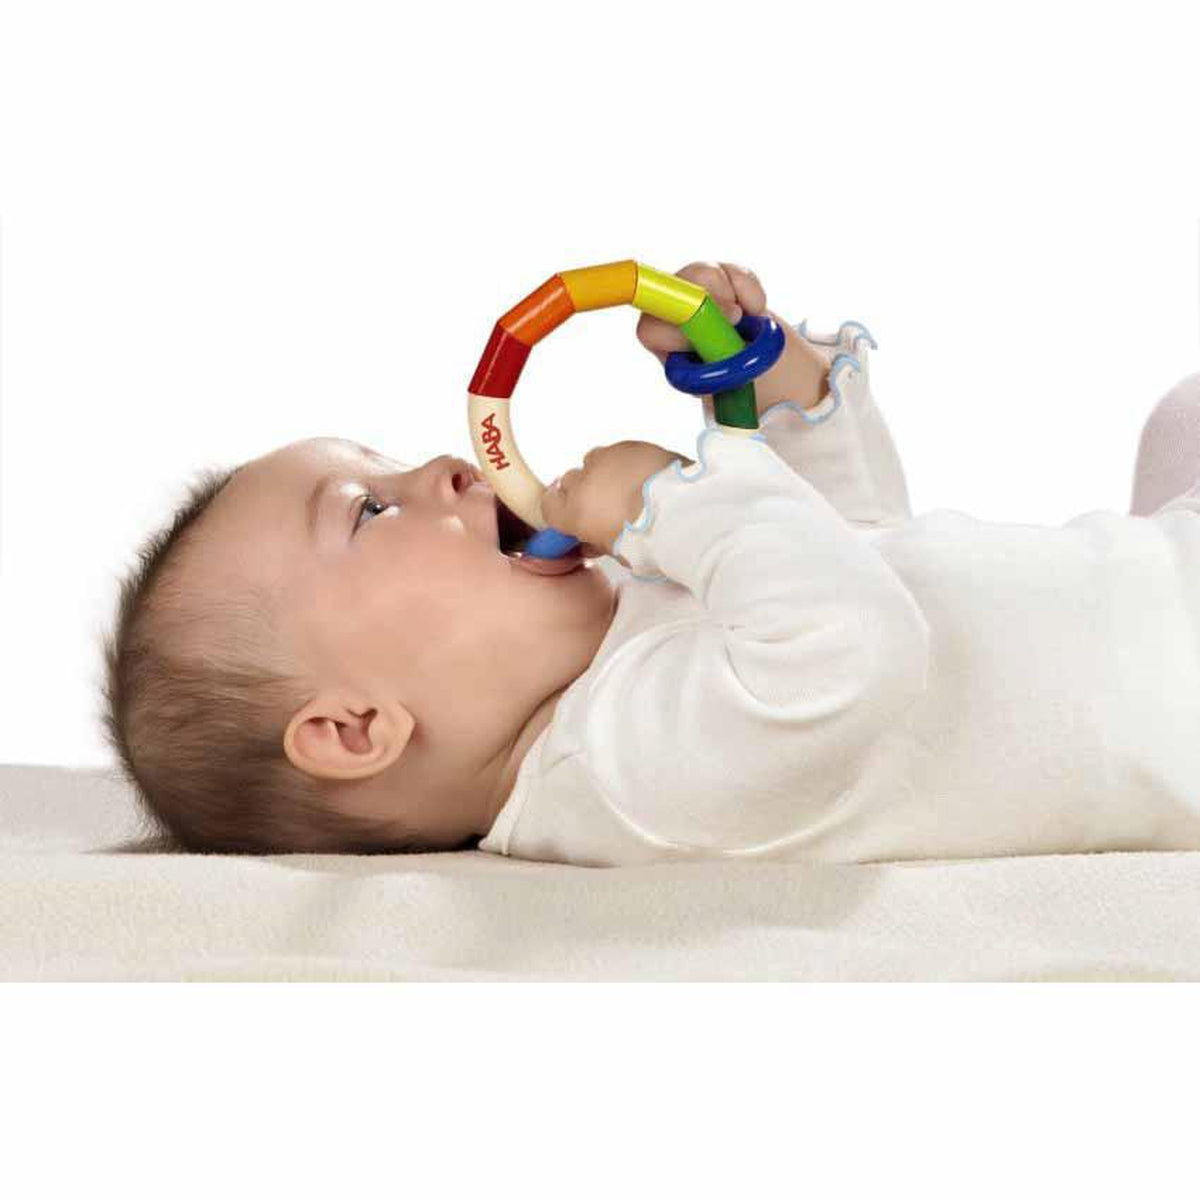 Haba rainbow ring clutching toy-baby-Haba-Dilly Dally Kids